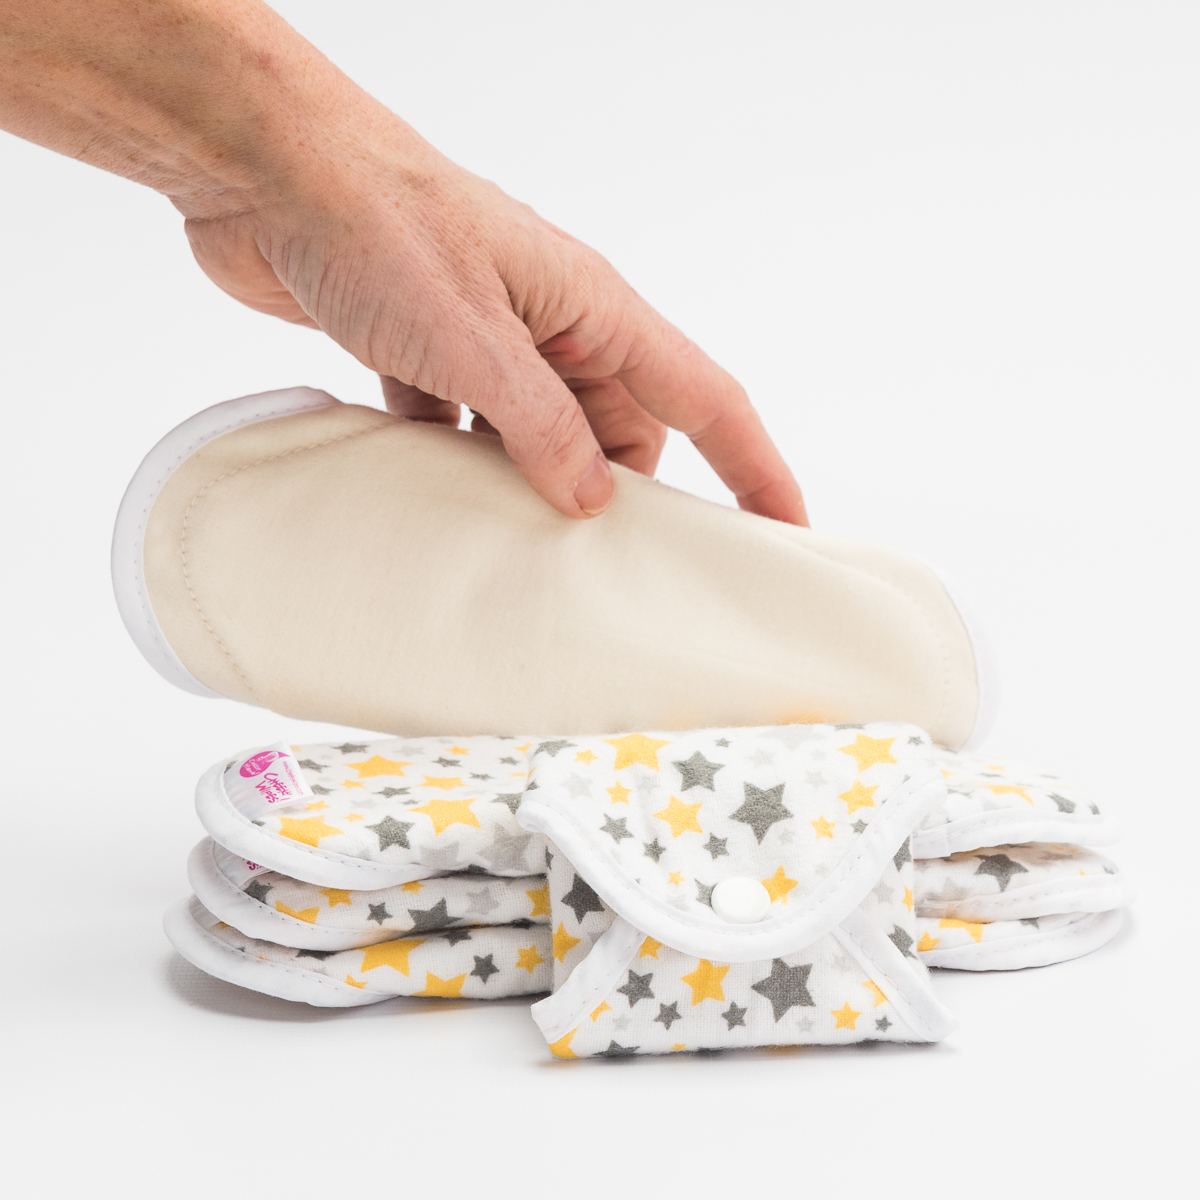 Reusable cotton sanitary towels from Cheeky Wipes - Stars